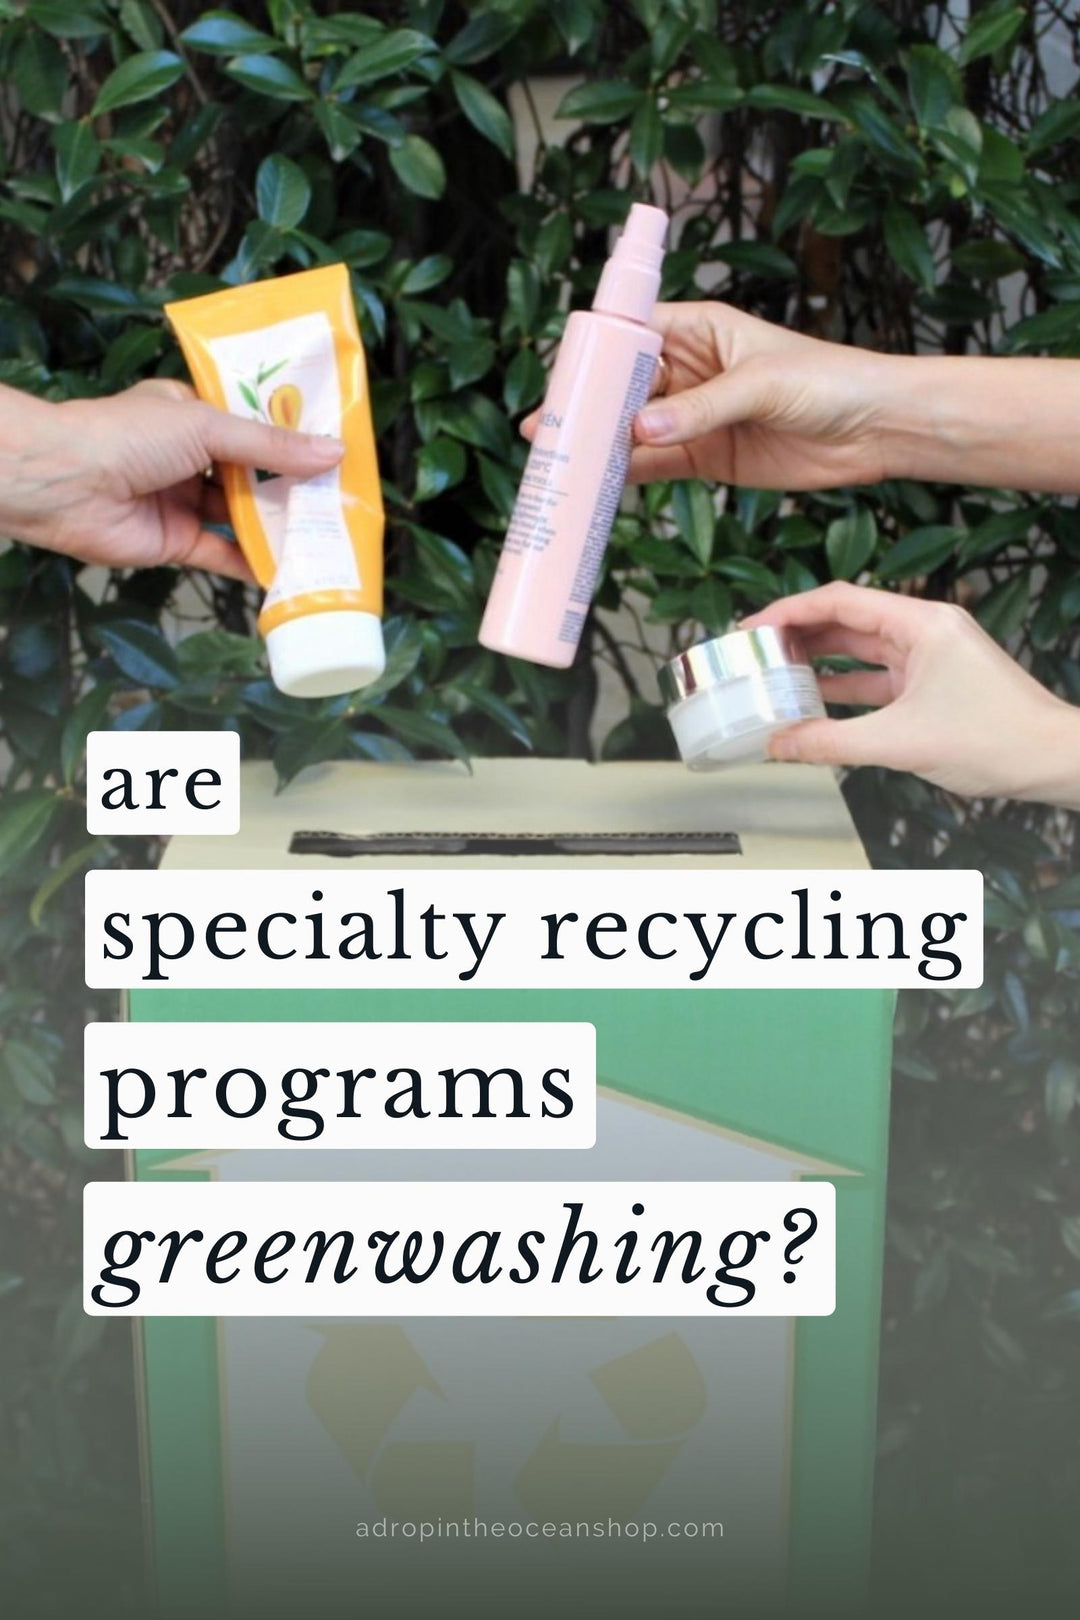 How "green" are specialty recycling programs?